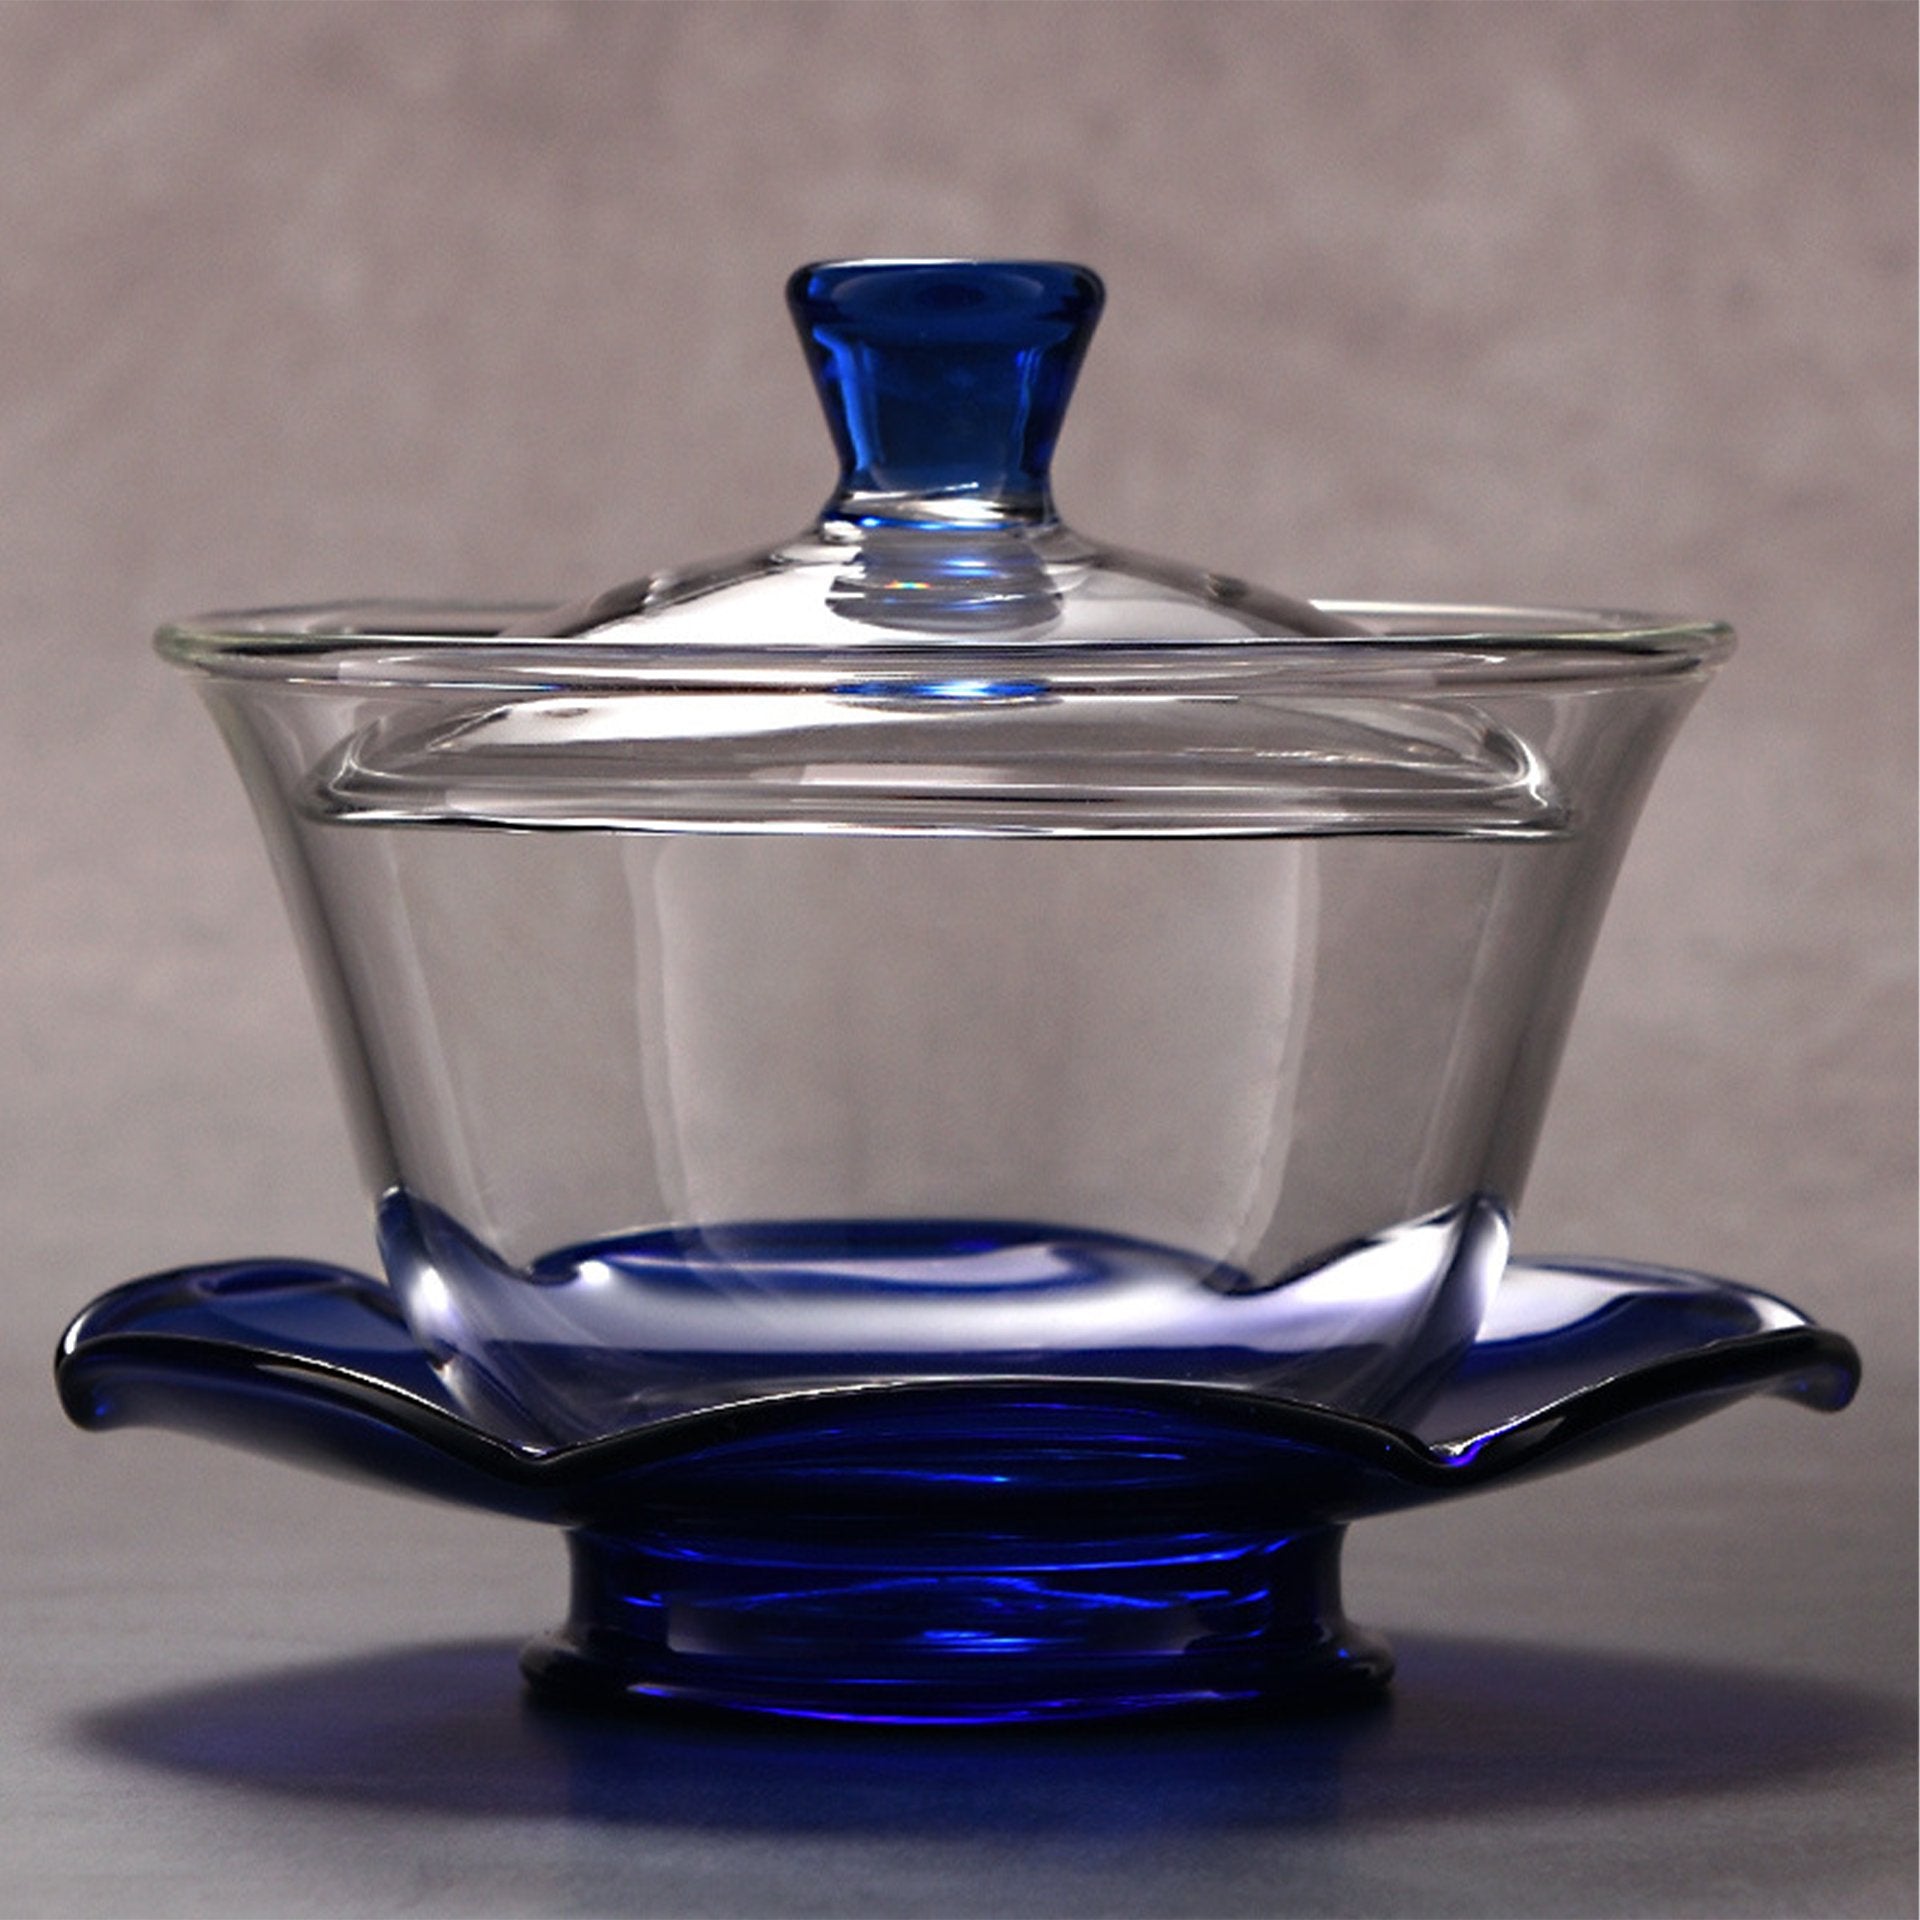 Gaiwan-style glass teapot with blue trim.